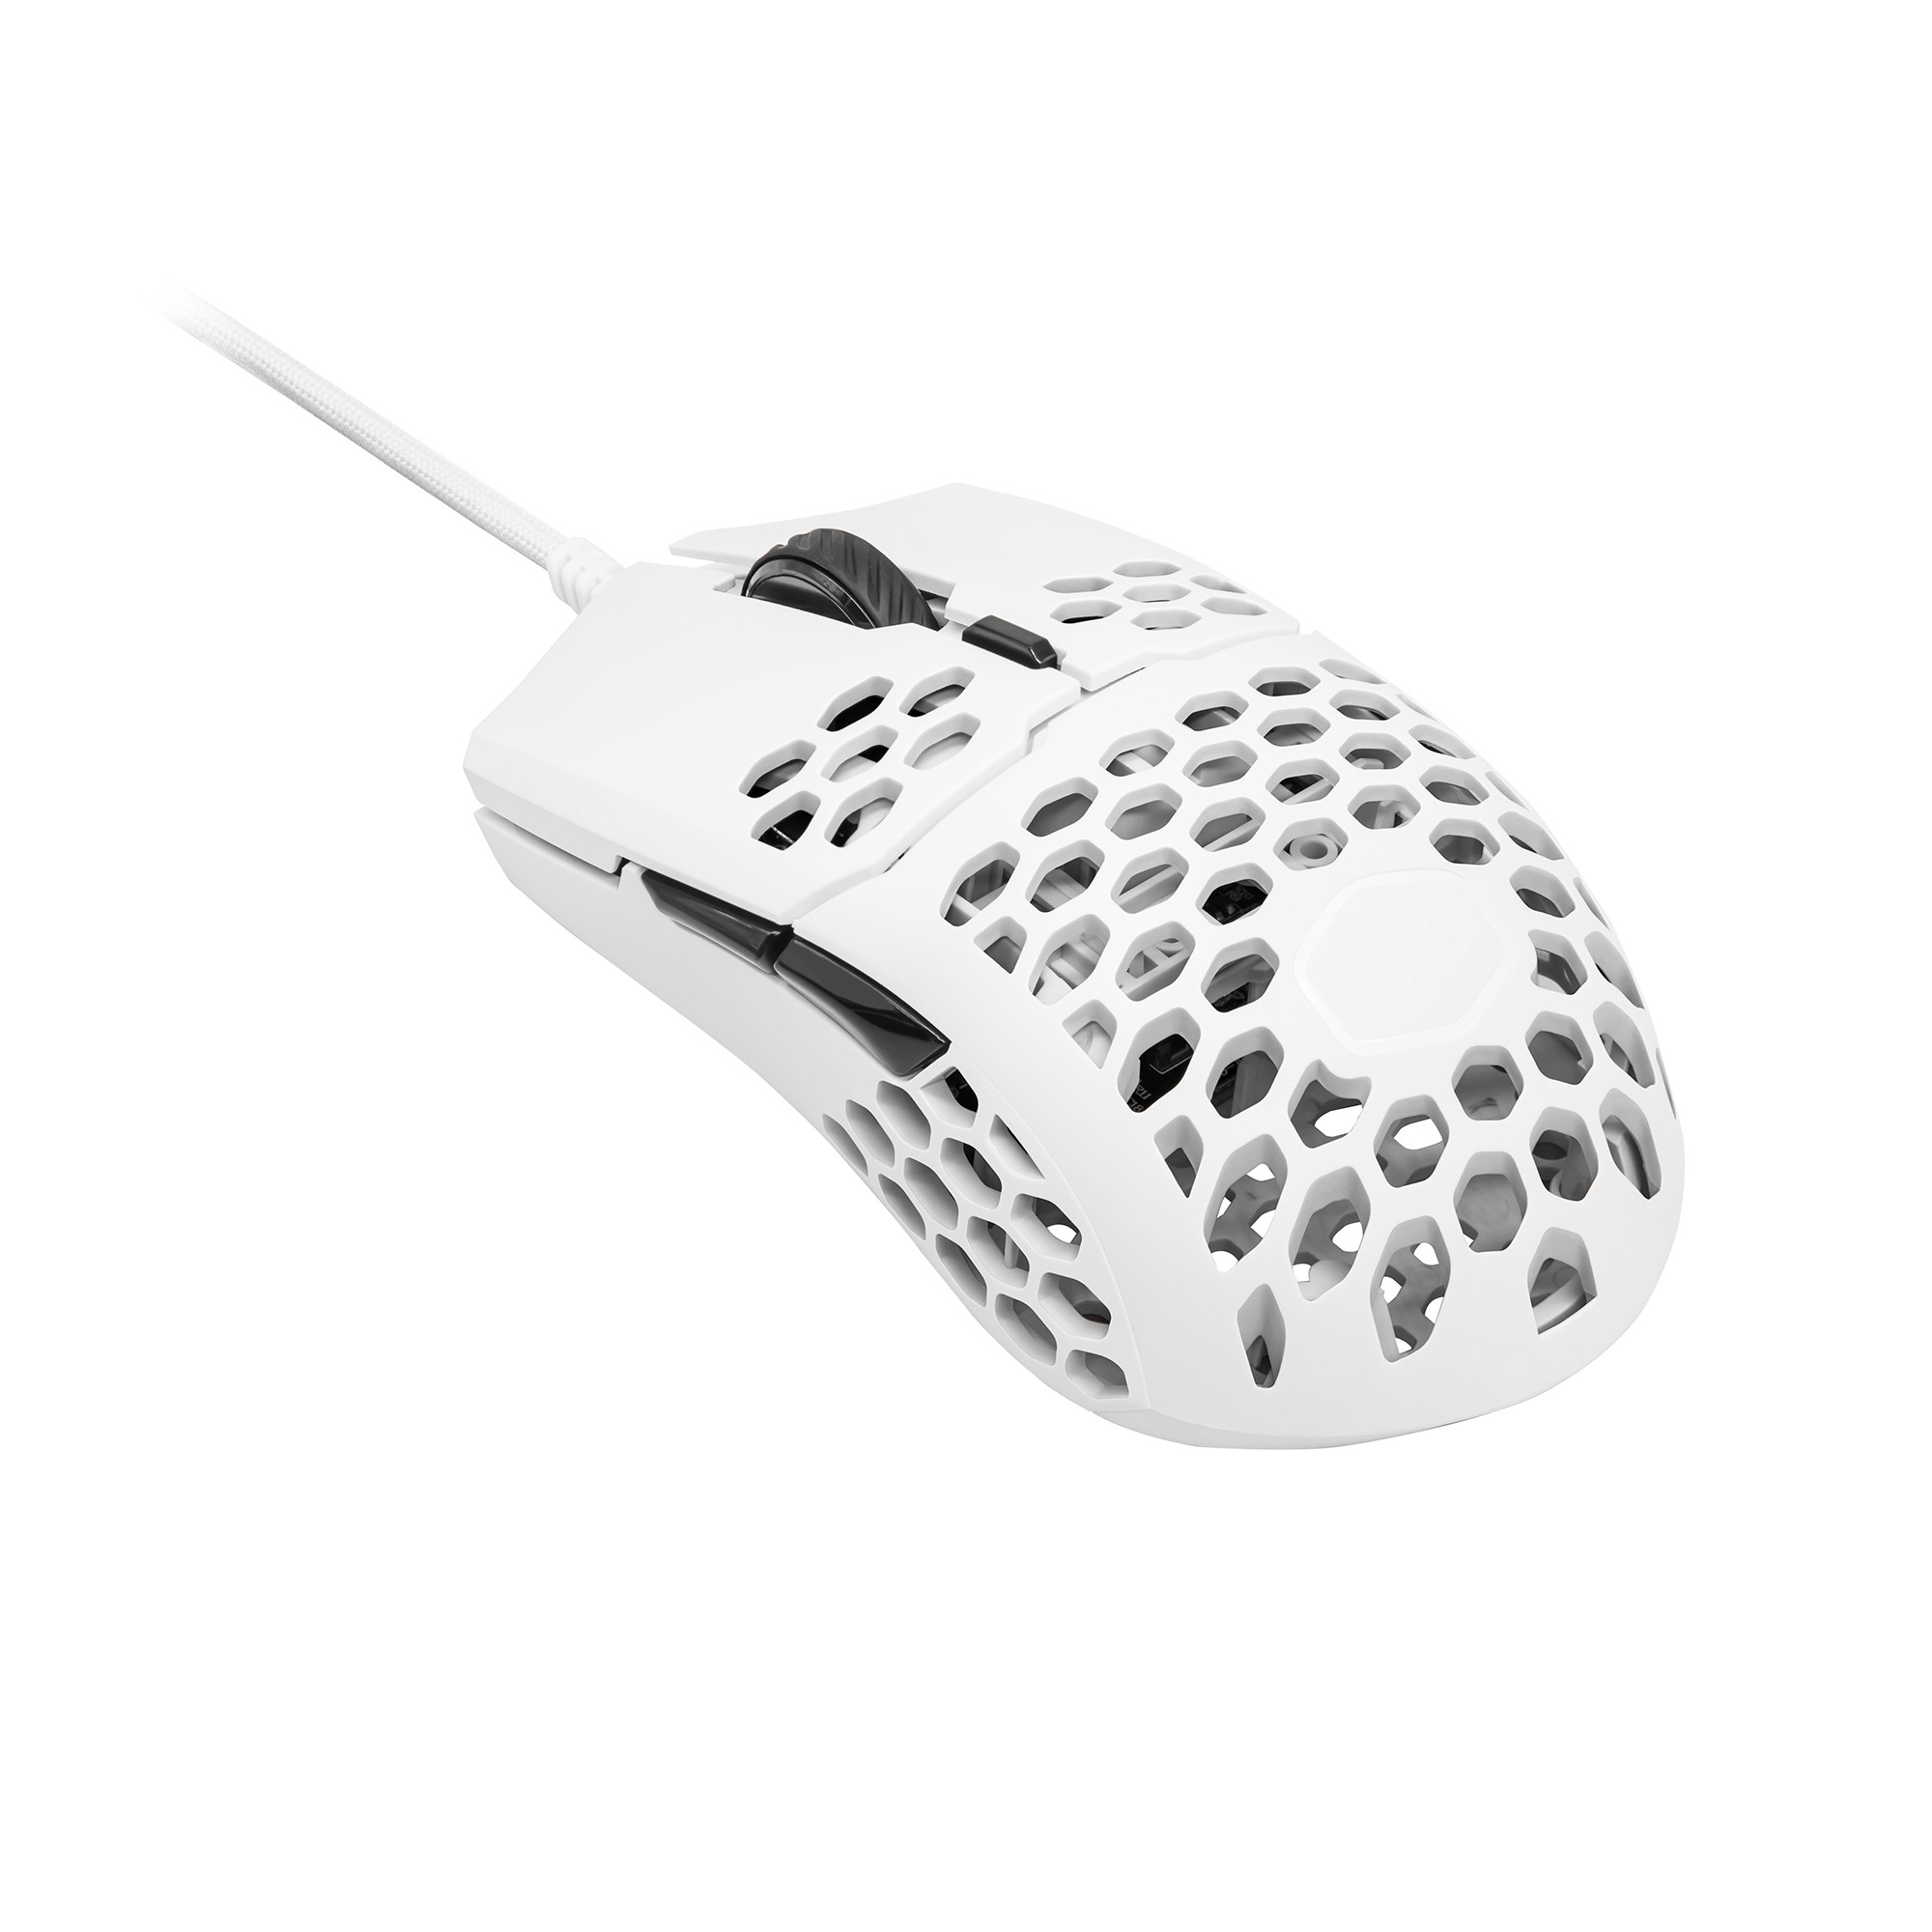 Cooler Master Mouse Gaming Wired Mastermouse Mm710 Optical Usb 16000 Dpi  Colore Bianco - Gaming - Esseshop - Il tuo Partner in Informatica, PC e  Networking